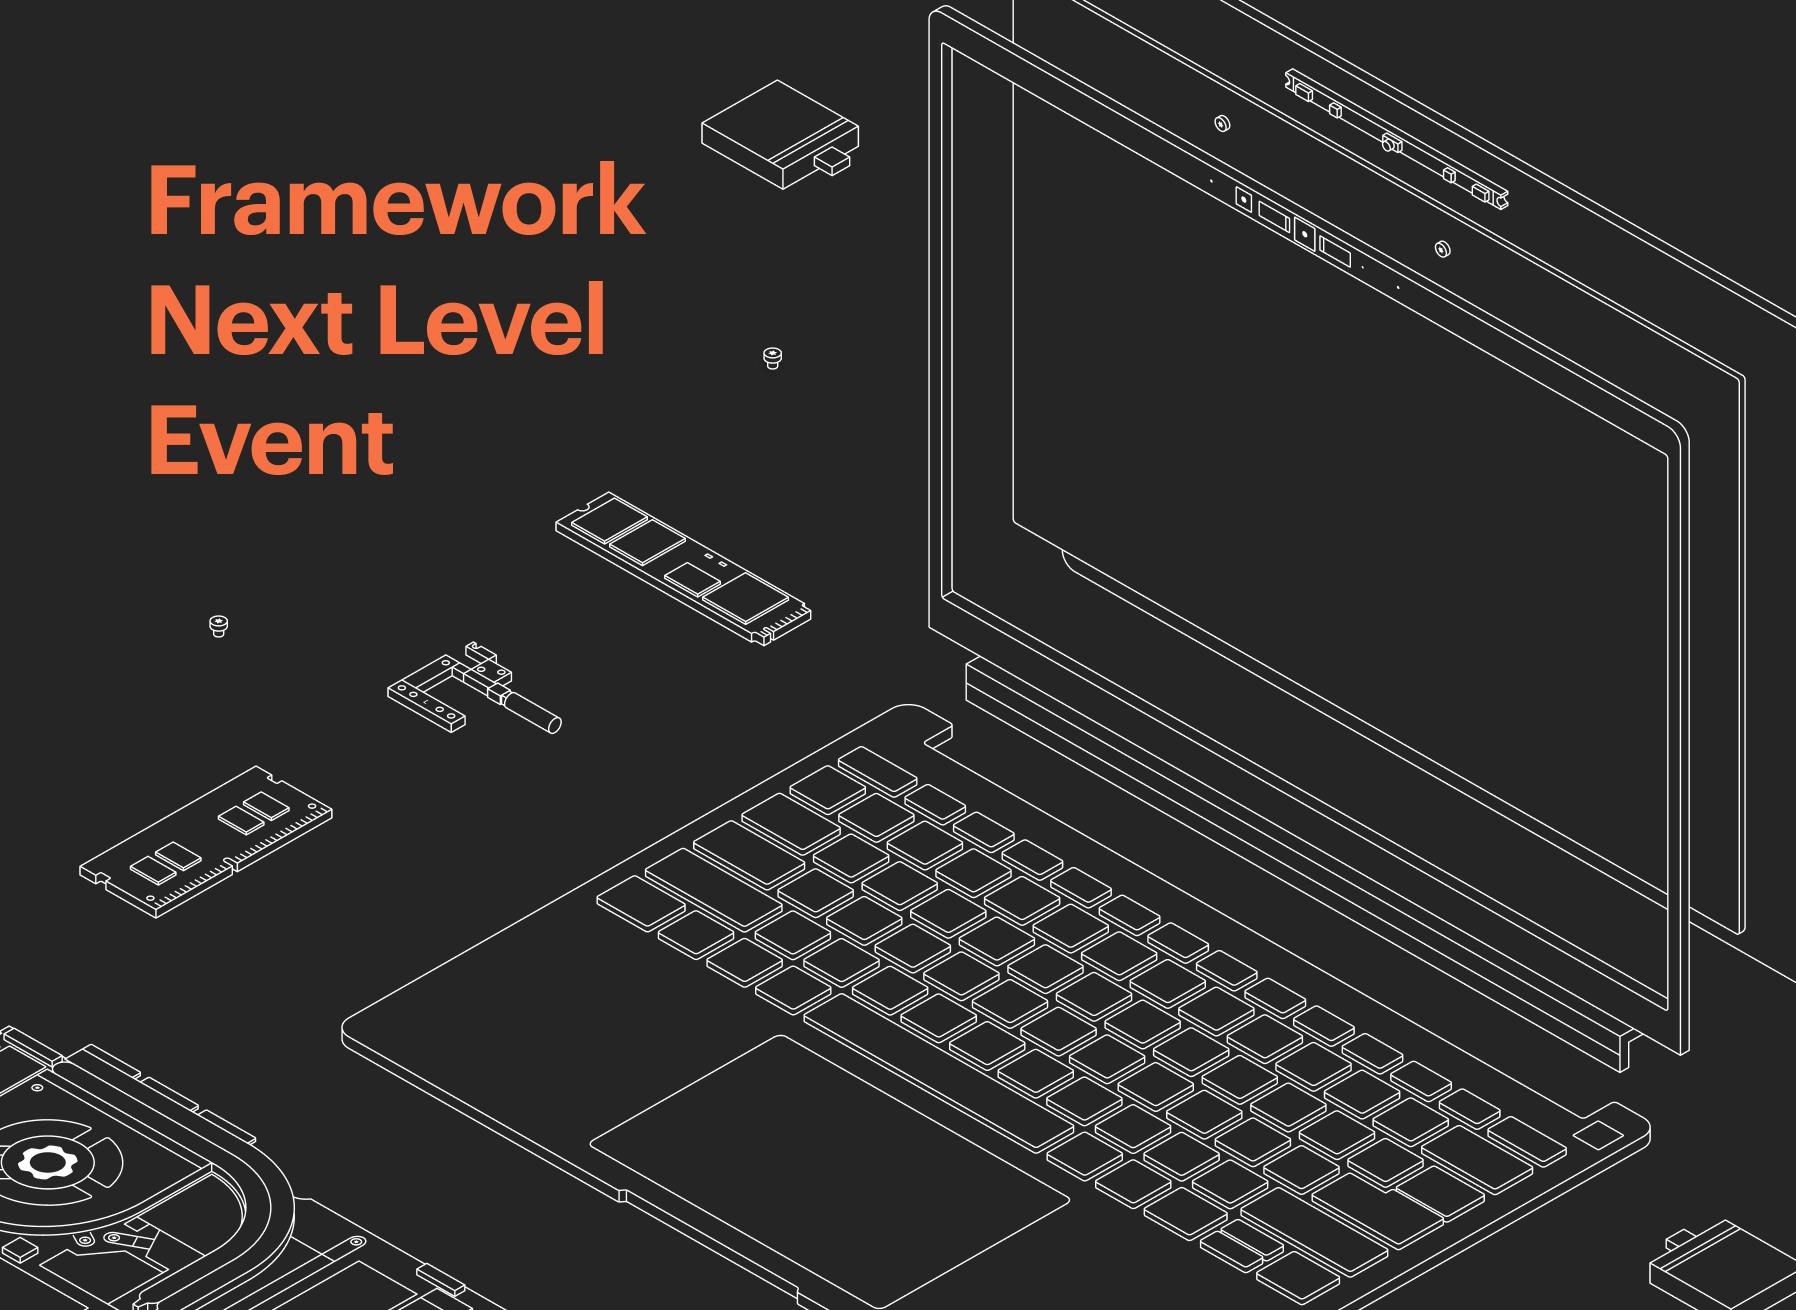 In 2021, we launched the Framework Laptop. In 2022, we delivered on the promise of upgradeability. Now, we are so very excited to share what's n